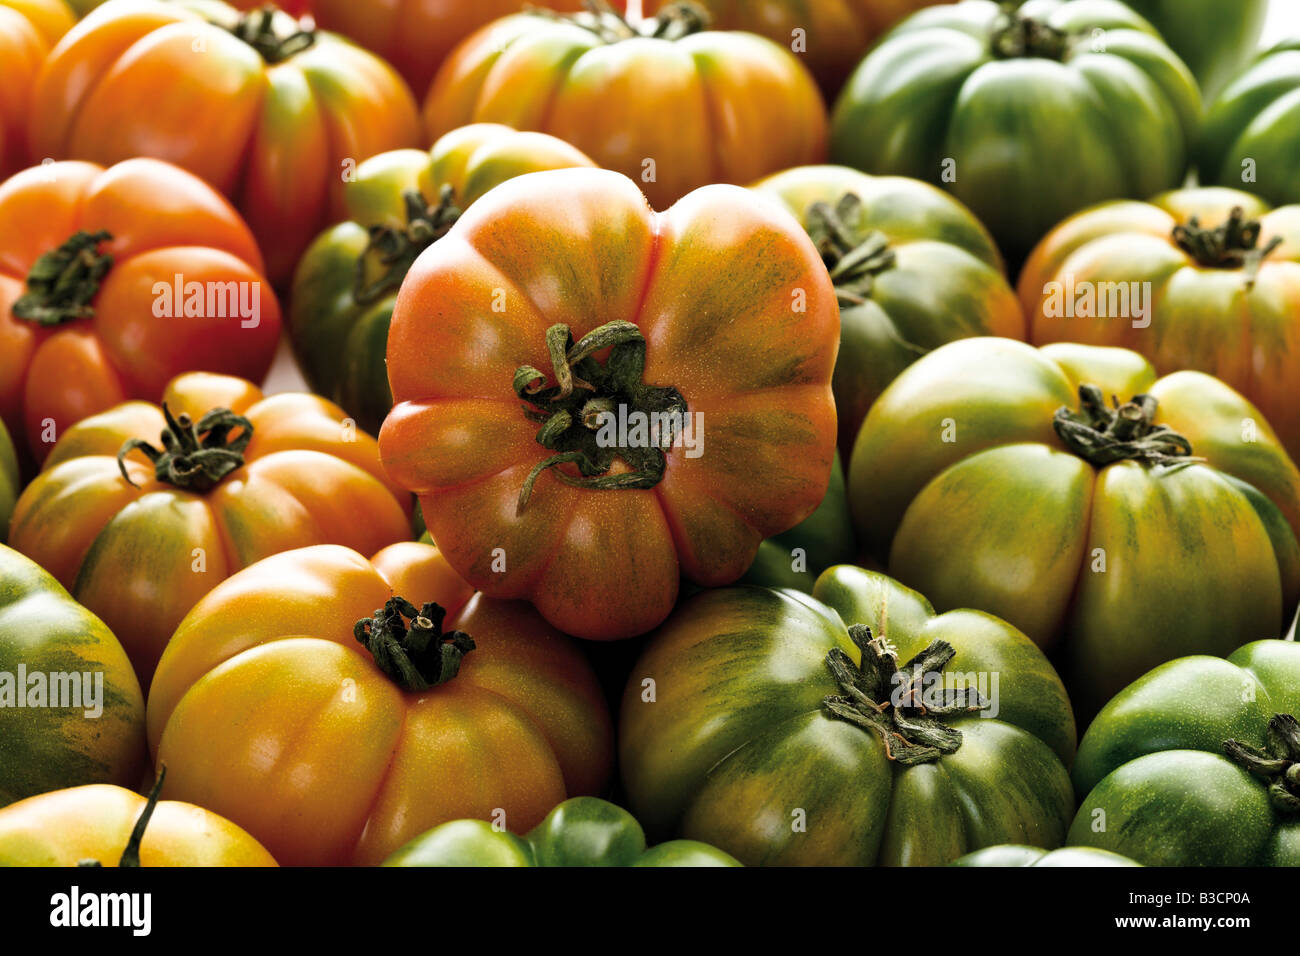 Oxheart Tomatoes, close-up, full frame Stock Photo